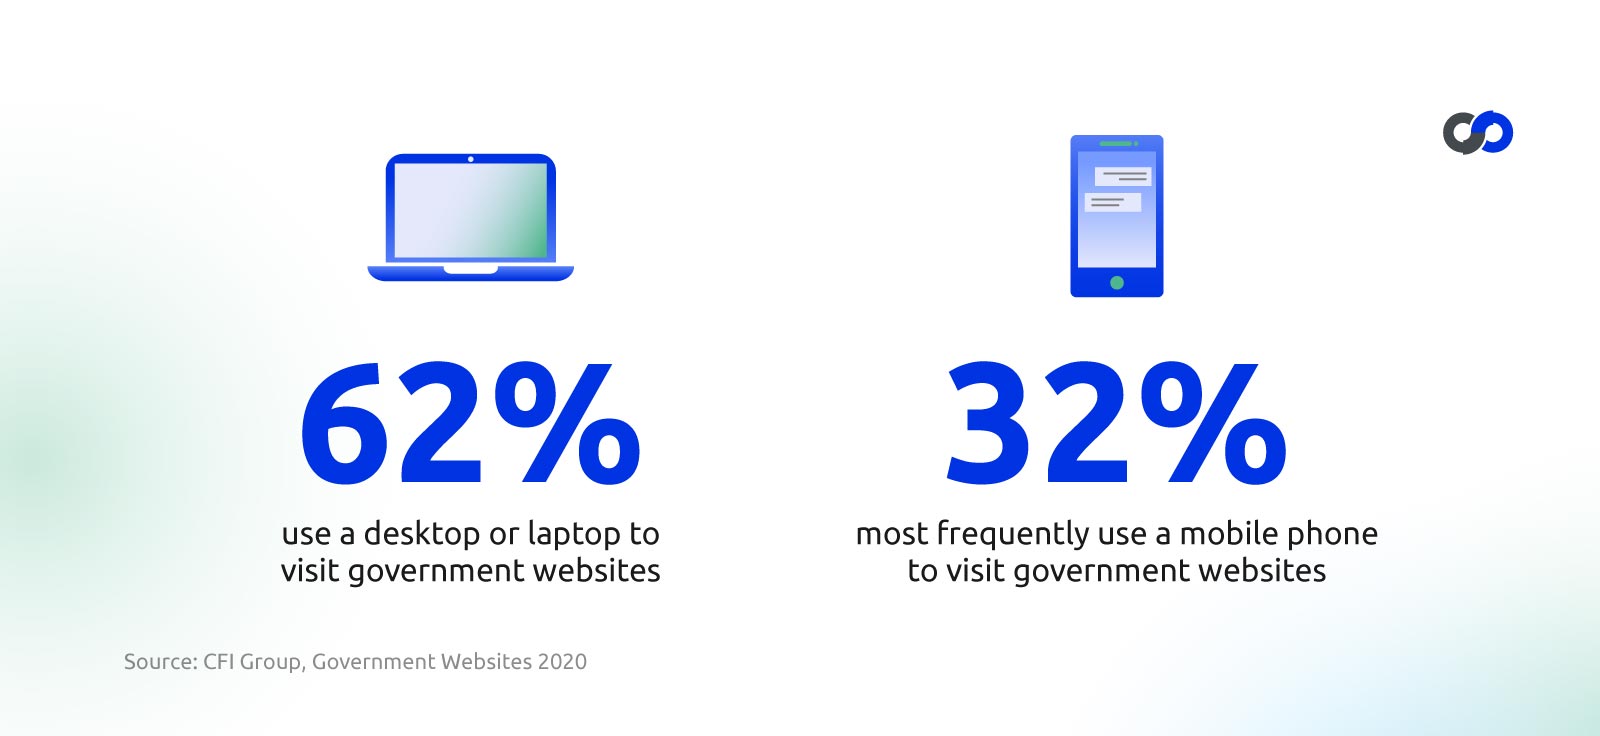 Device difference when reaching out to government customer service